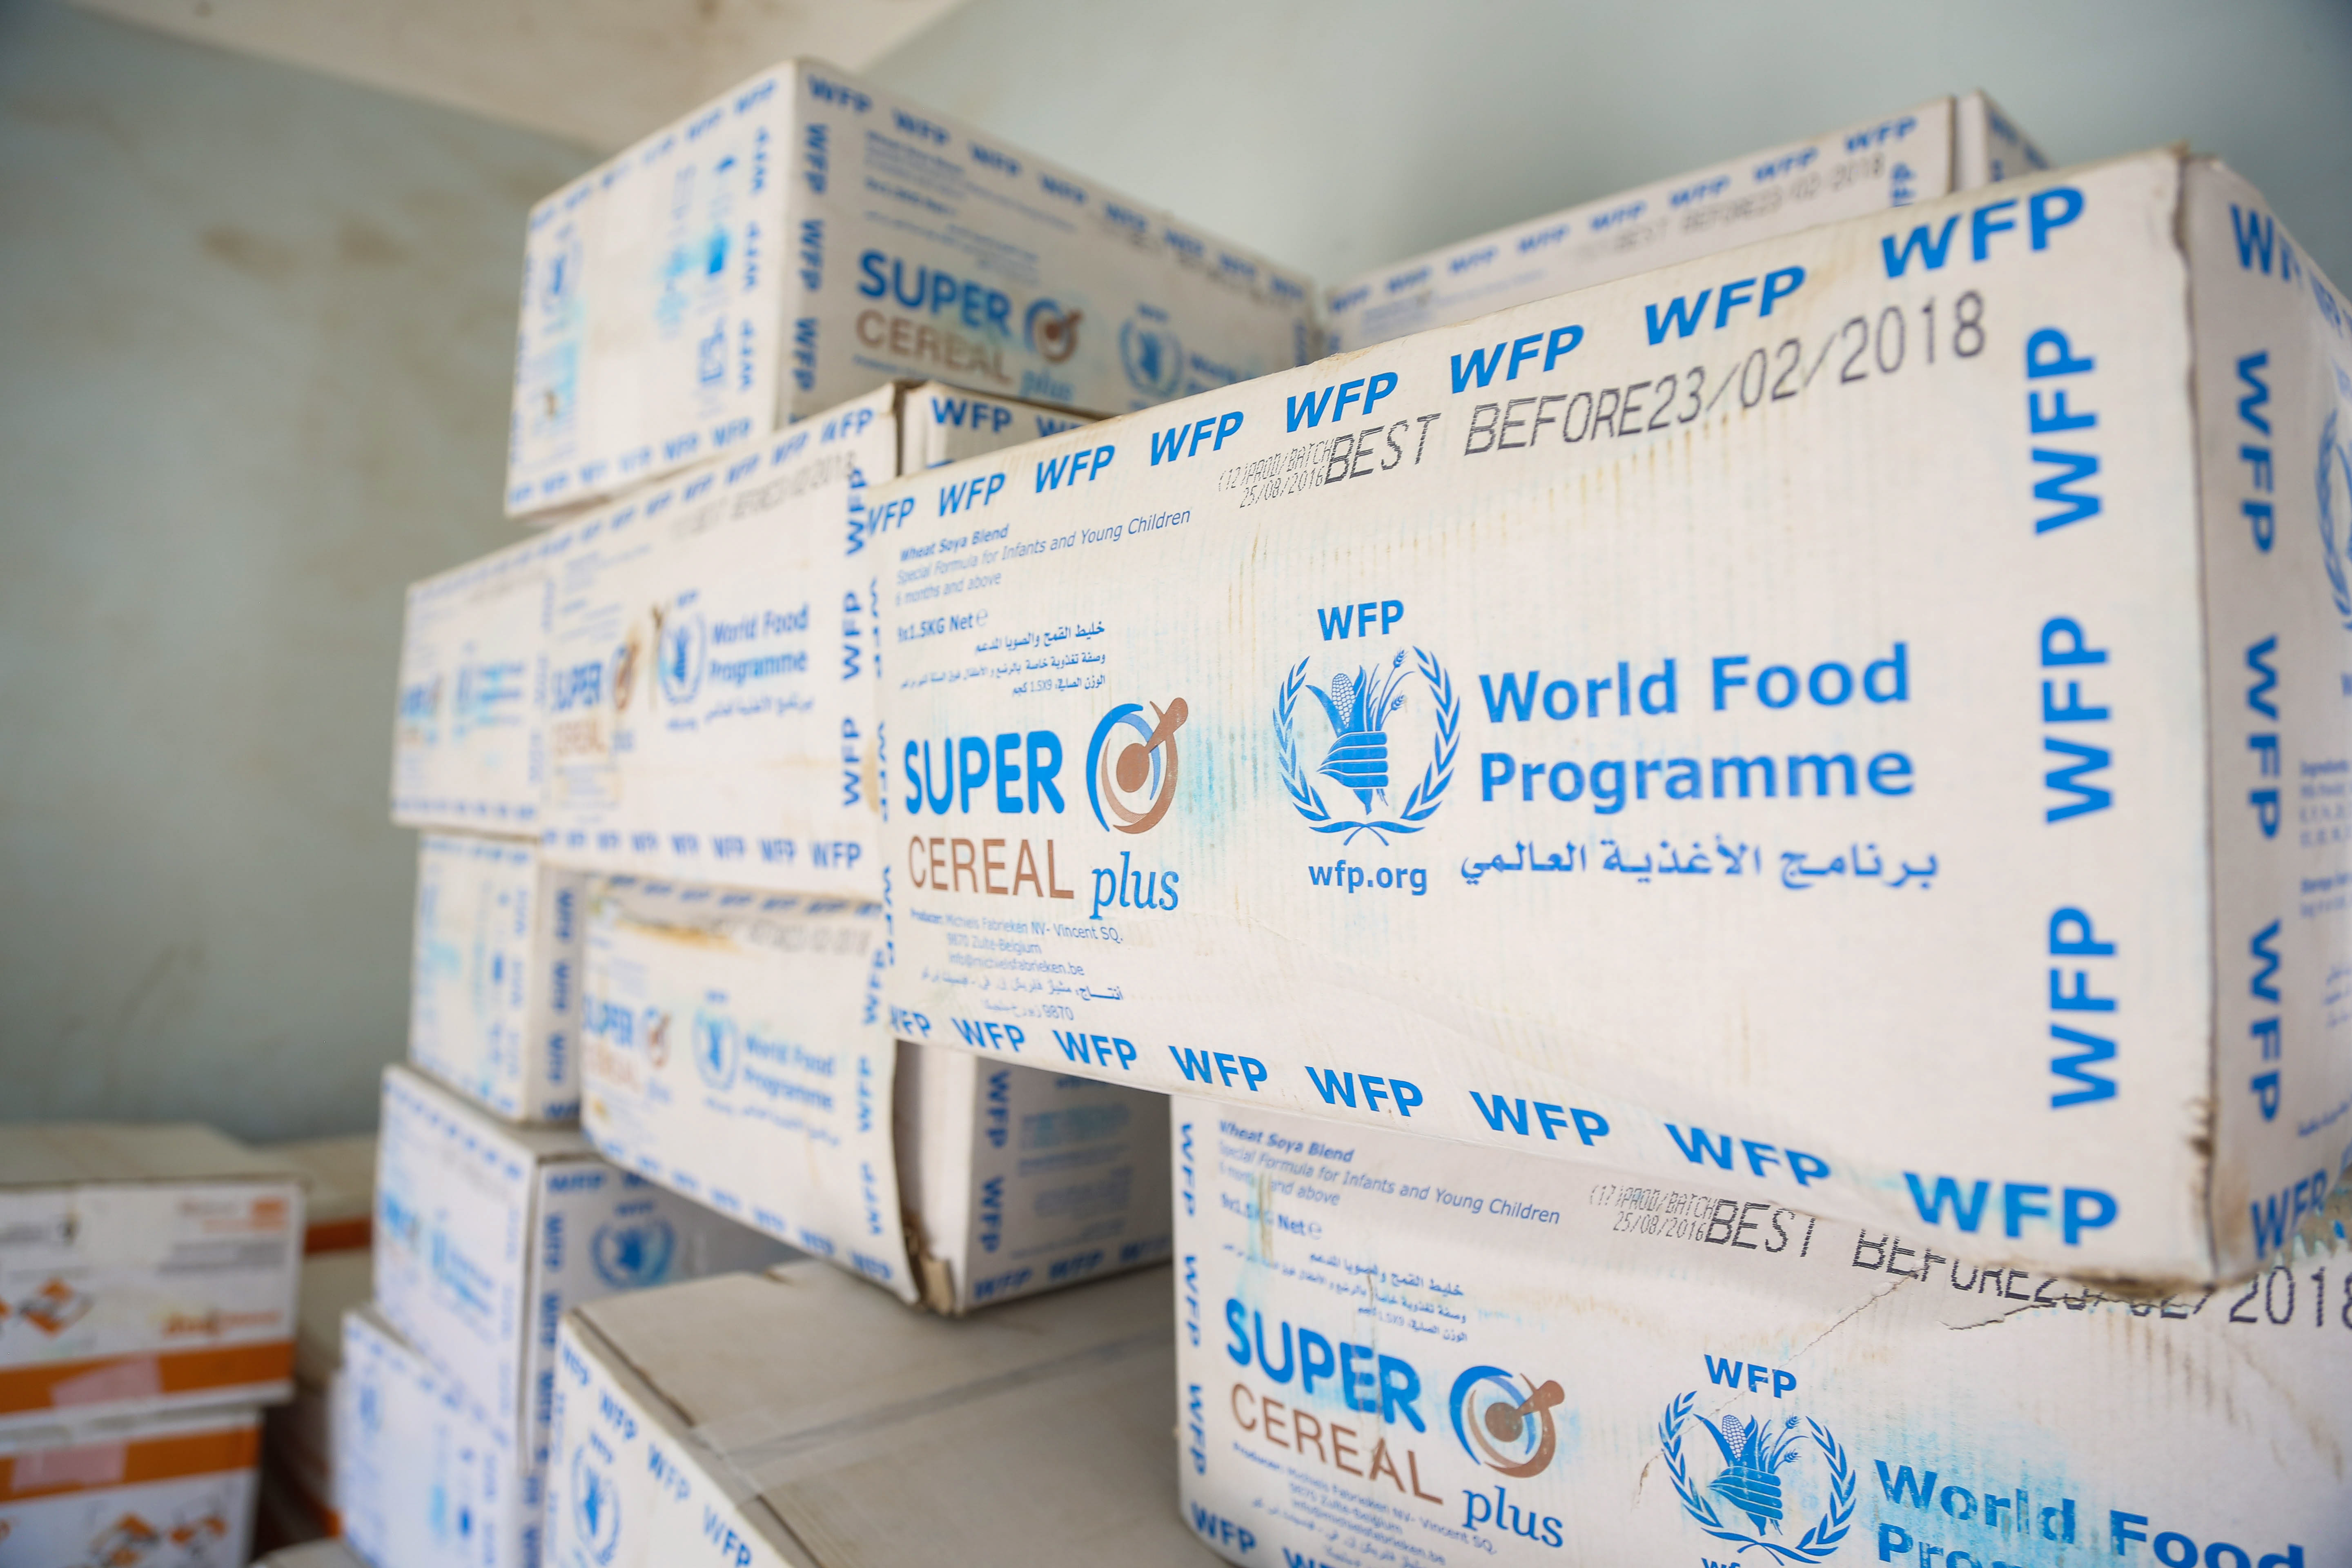 WFP delivers life-saving food for those suffering from hunger and famine